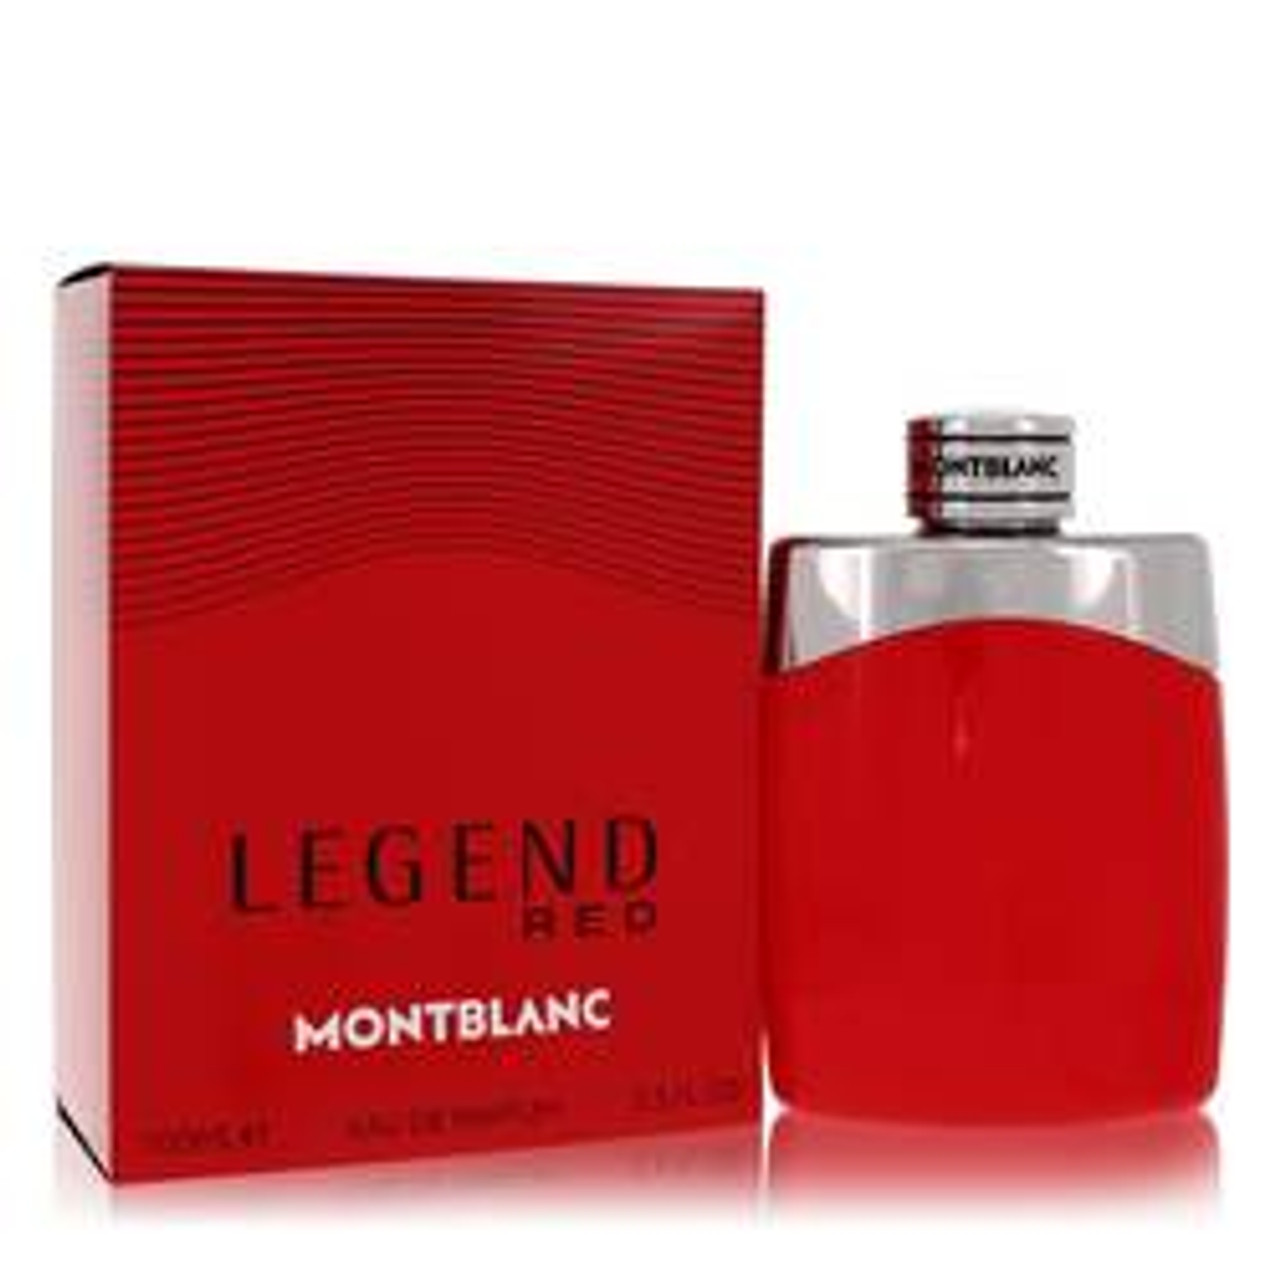 Montblanc Legend Red Cologne By Mont Blanc Eau De Parfum Spray 3.3 oz for Men - [From 116.00 - Choose pk Qty ] - *Ships from Miami